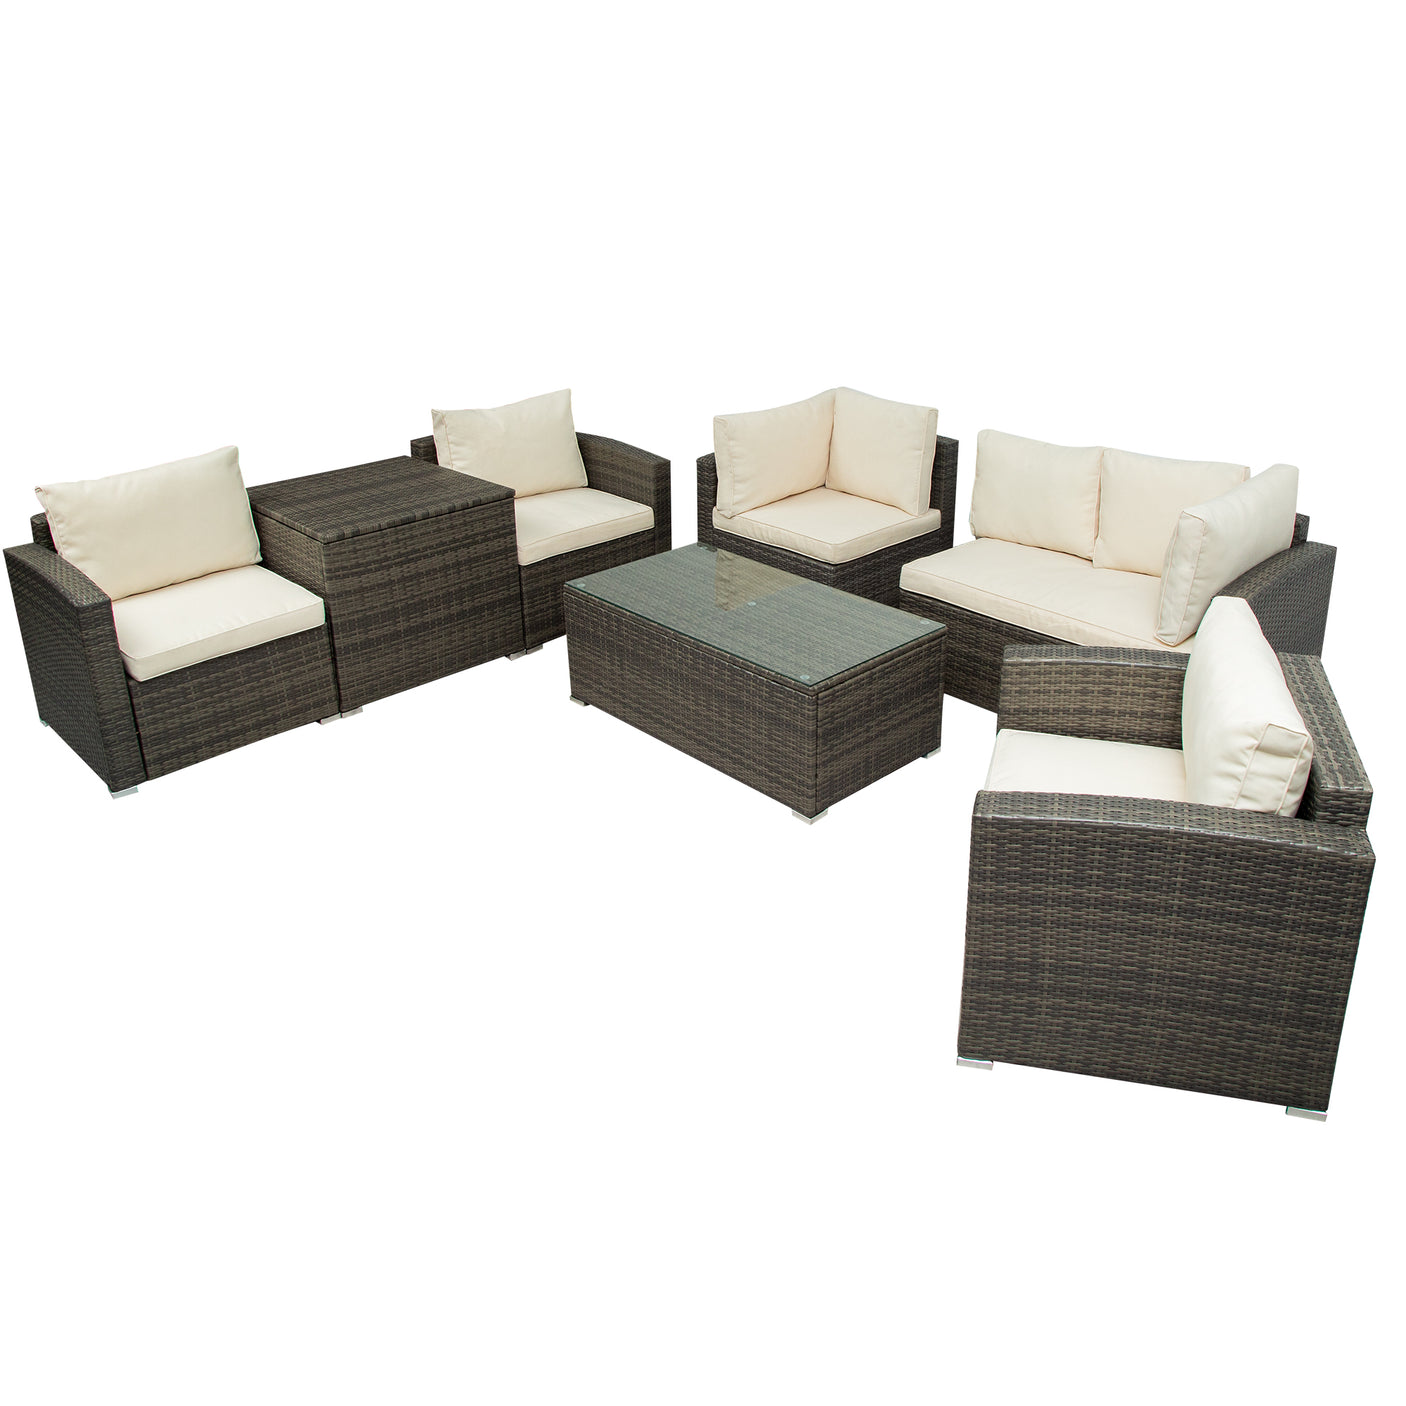 U_STYLE Patio Furniture Sets, 7-Piece Patio Wicker Sofa , Cushions, Chairs , a Loveseat , a Table and a Storage Box